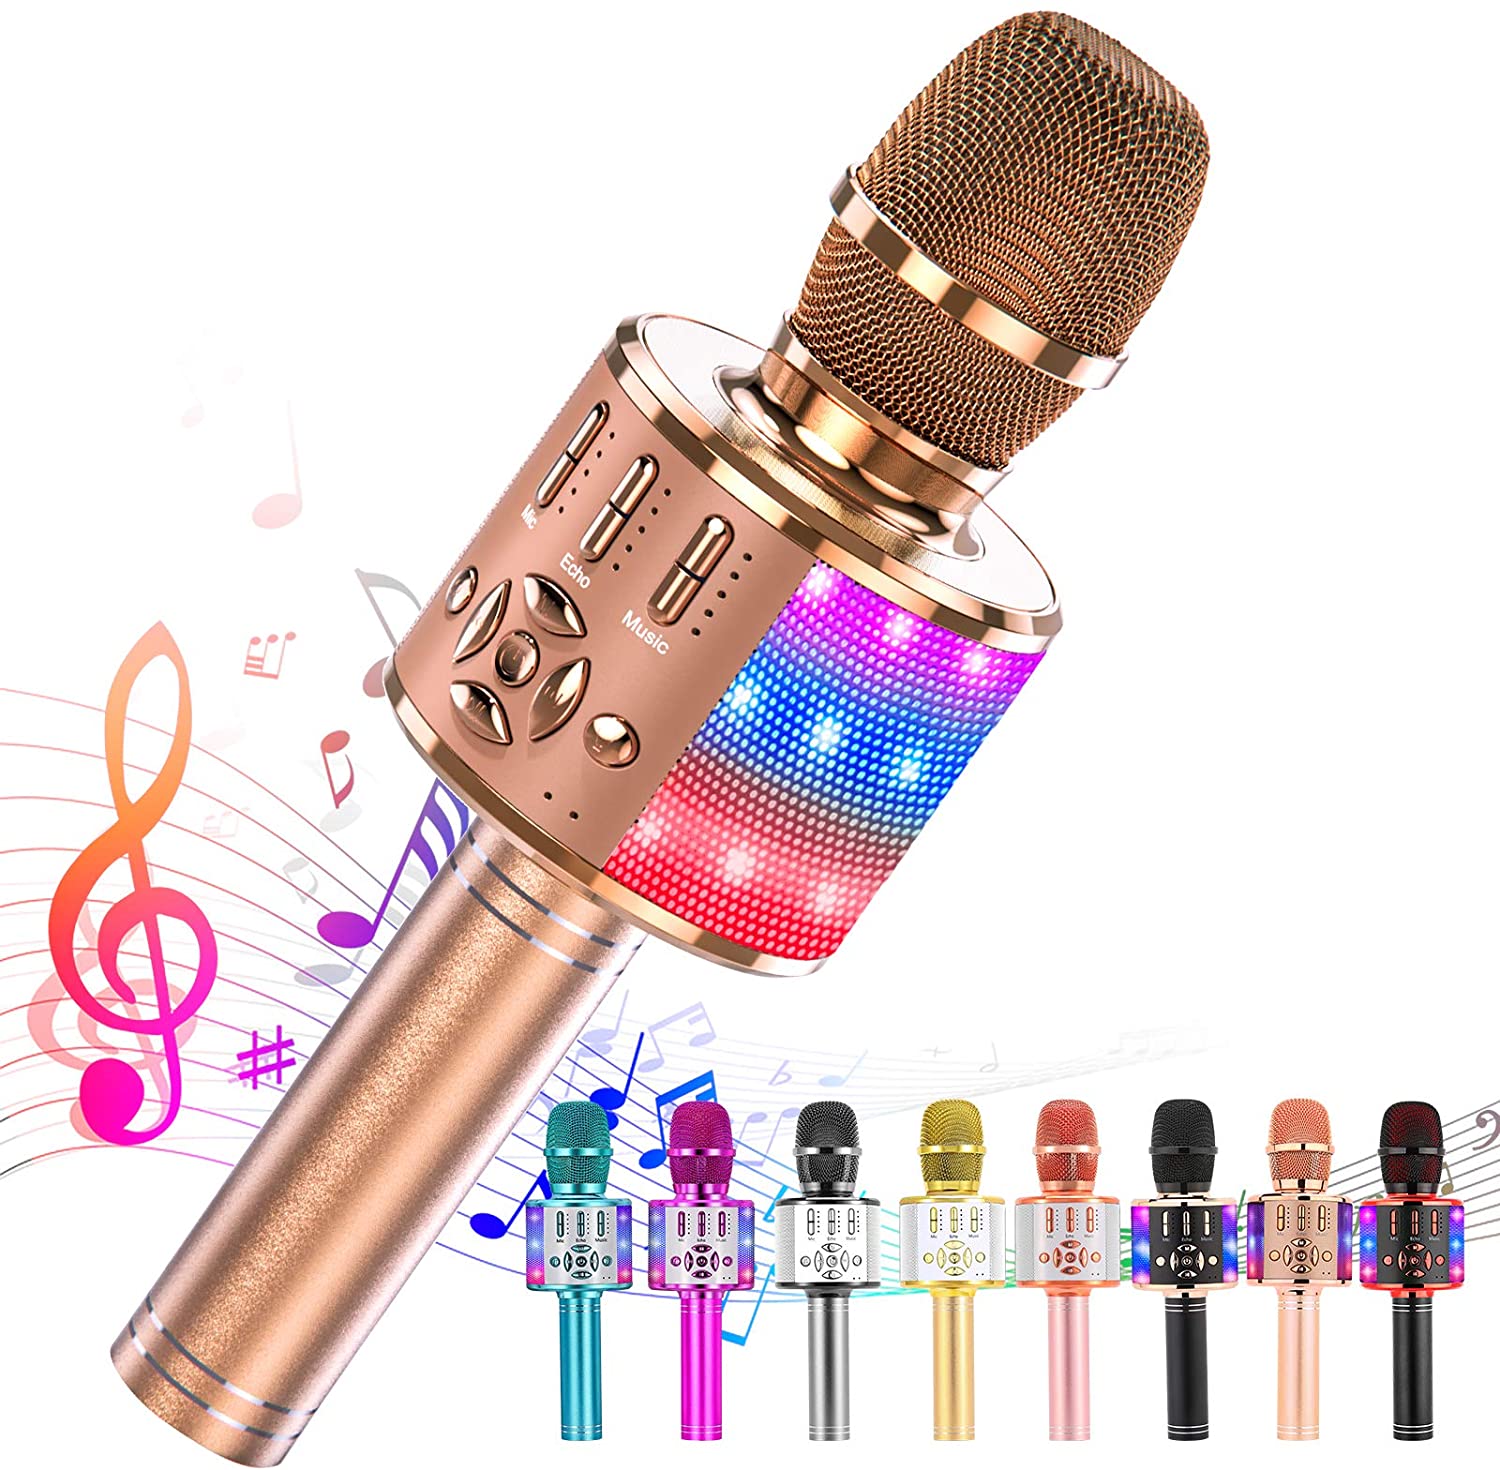 Rose Gold Microphone